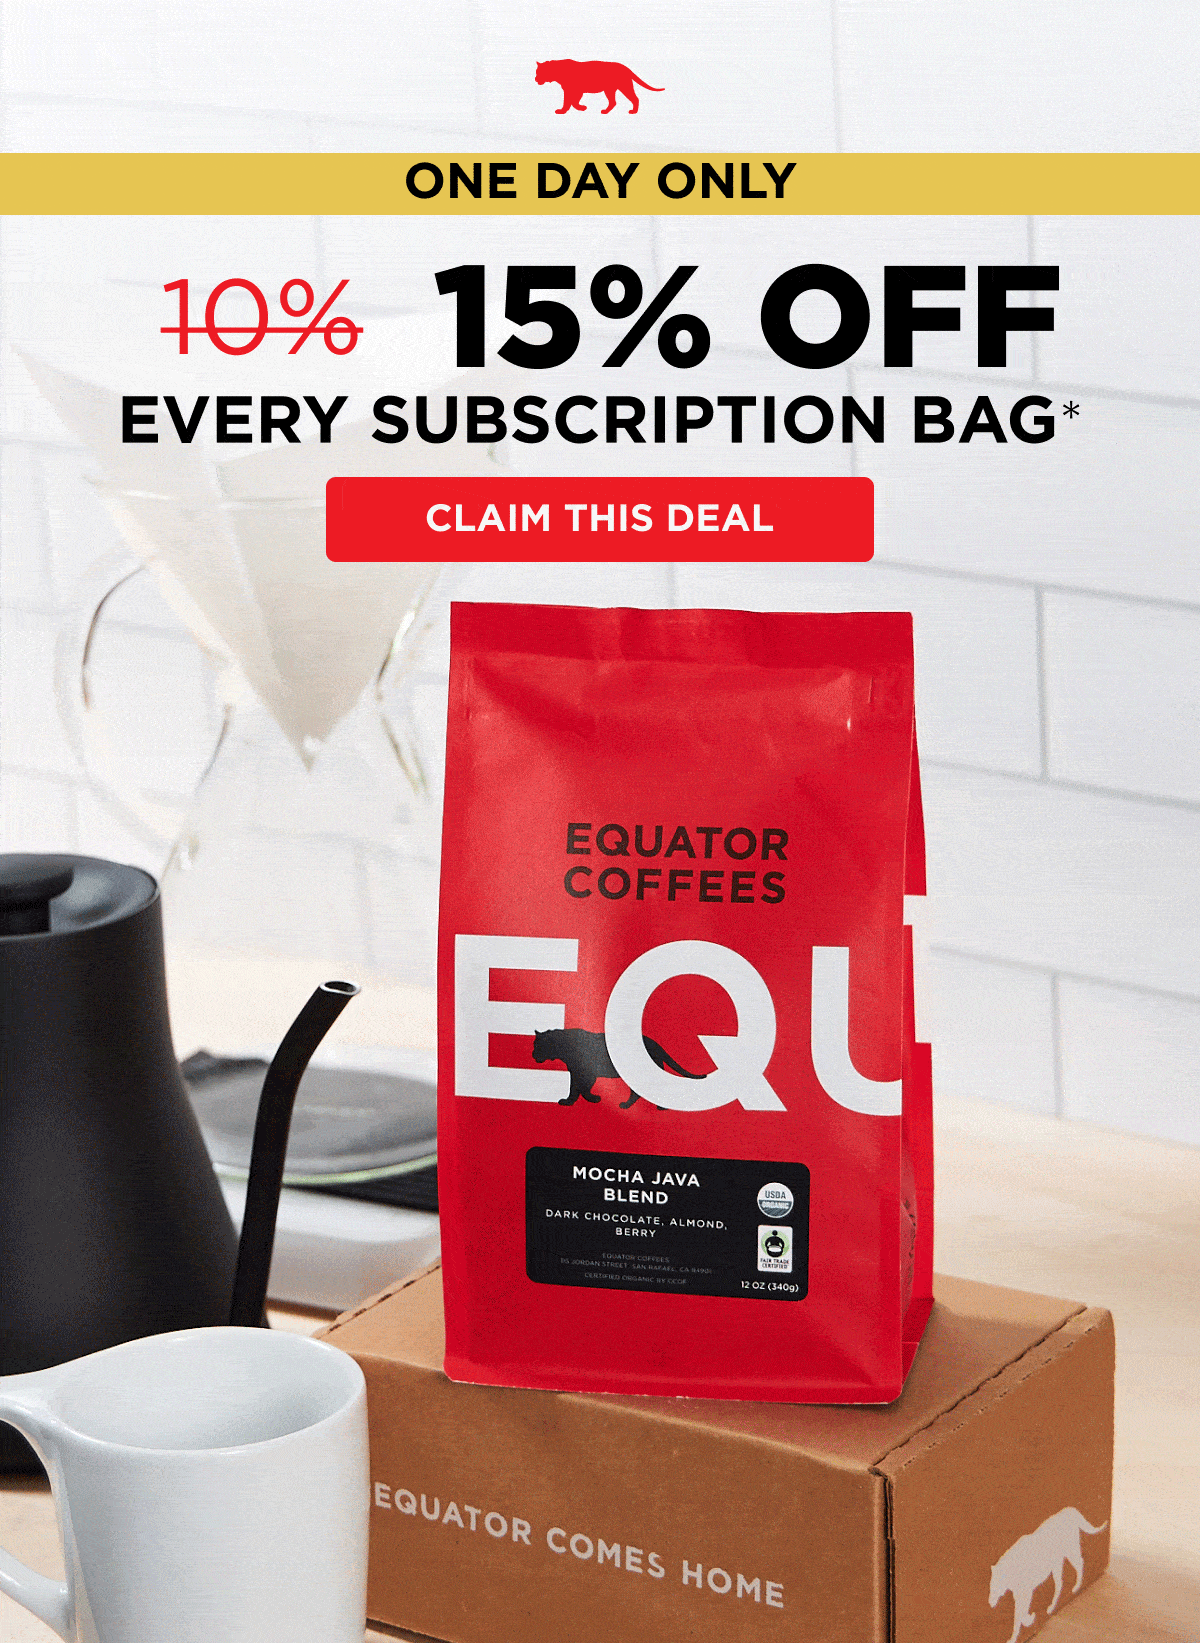 One Day Only: 20% OFF Every Subscription Bag